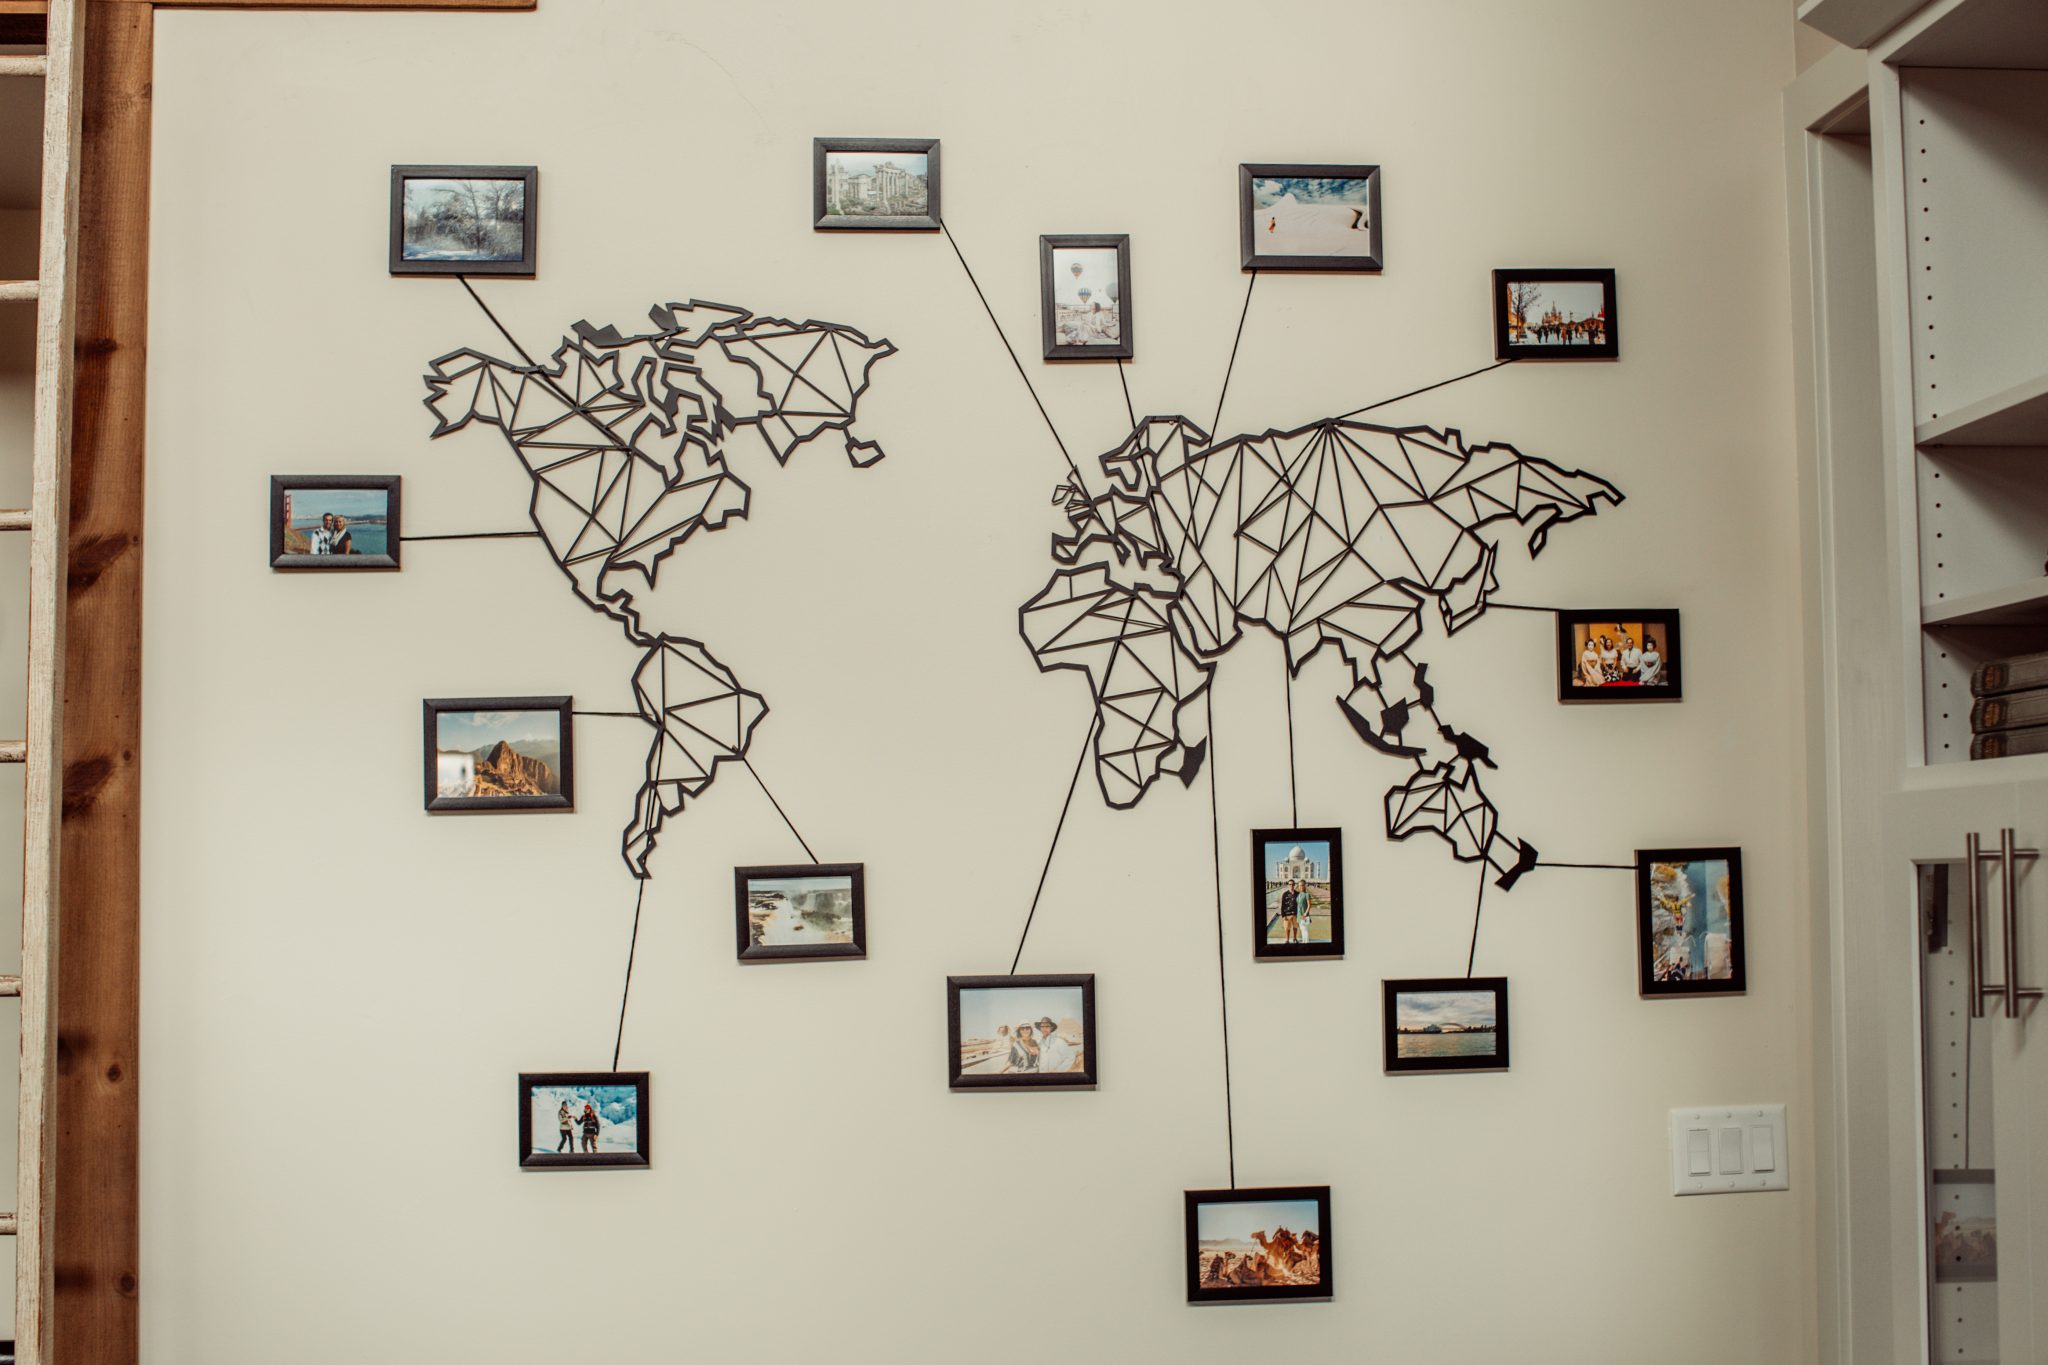 This creative travel wall features a laser-cut world map made from metal with framed pictures surrounding it. Each photo is tied to a location with a strand of yarn, showing where the photo was taken.